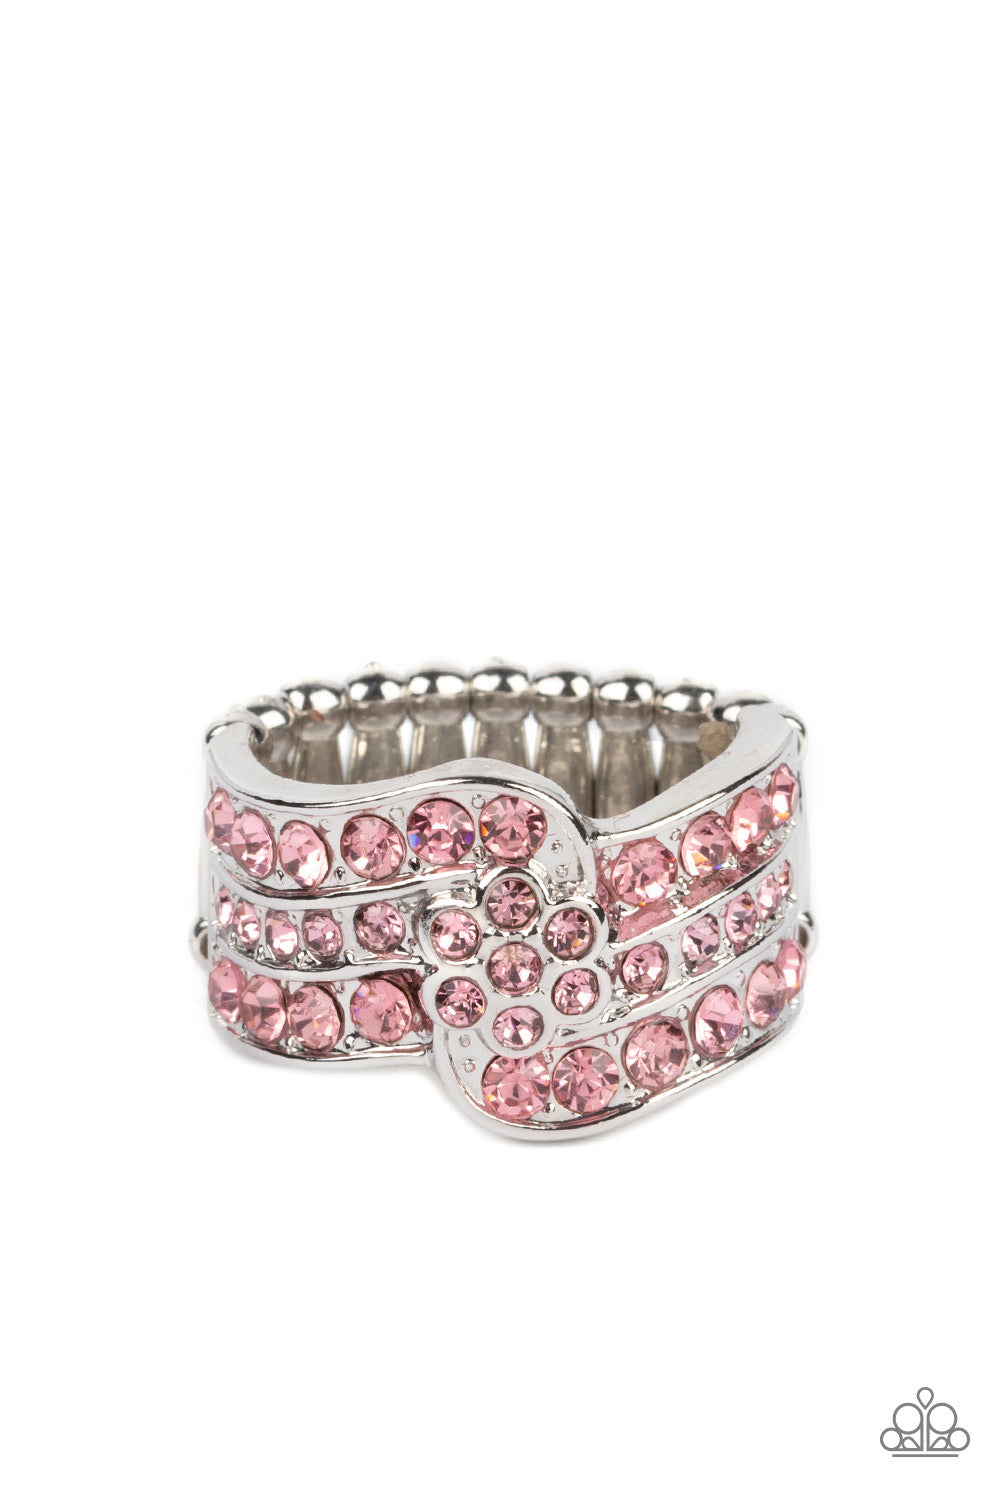 Paparazzi No Flowers Barred - Pink Ring - A Finishing Touch Jewelry